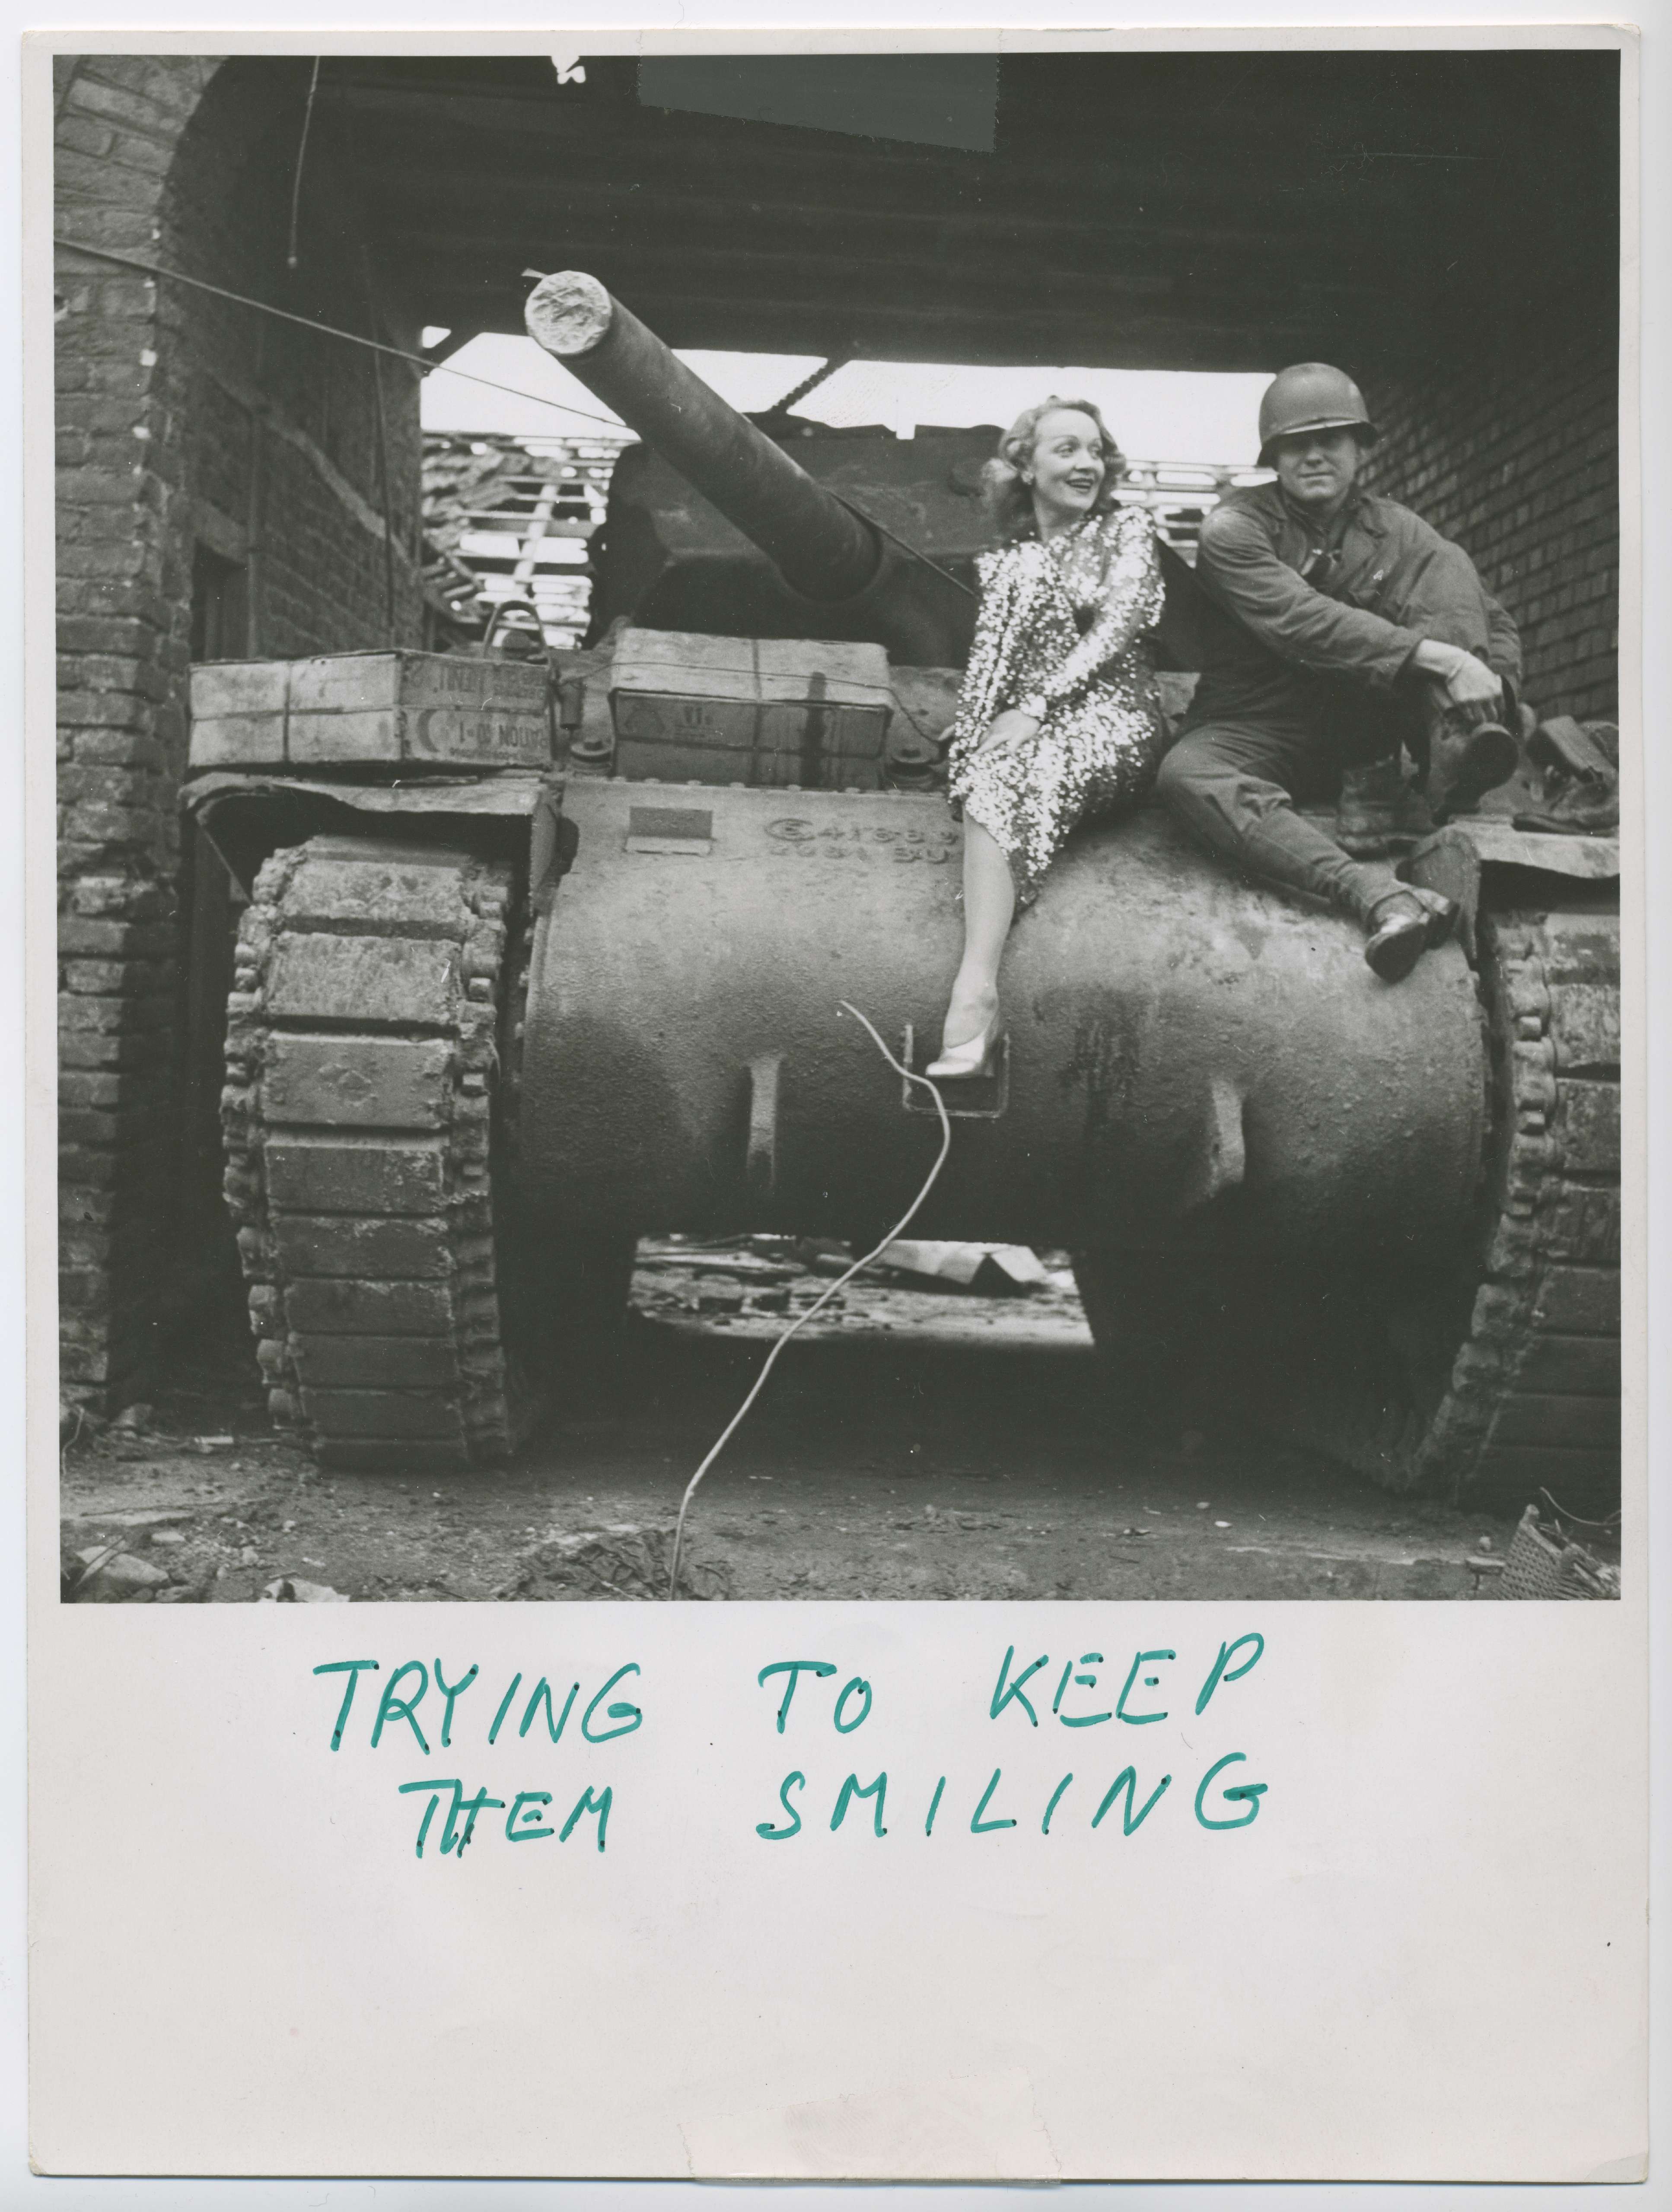 Marlene Dietrich in a performance costume, on a US army tank in Gillrath bei Geilenkirchen in February 1945